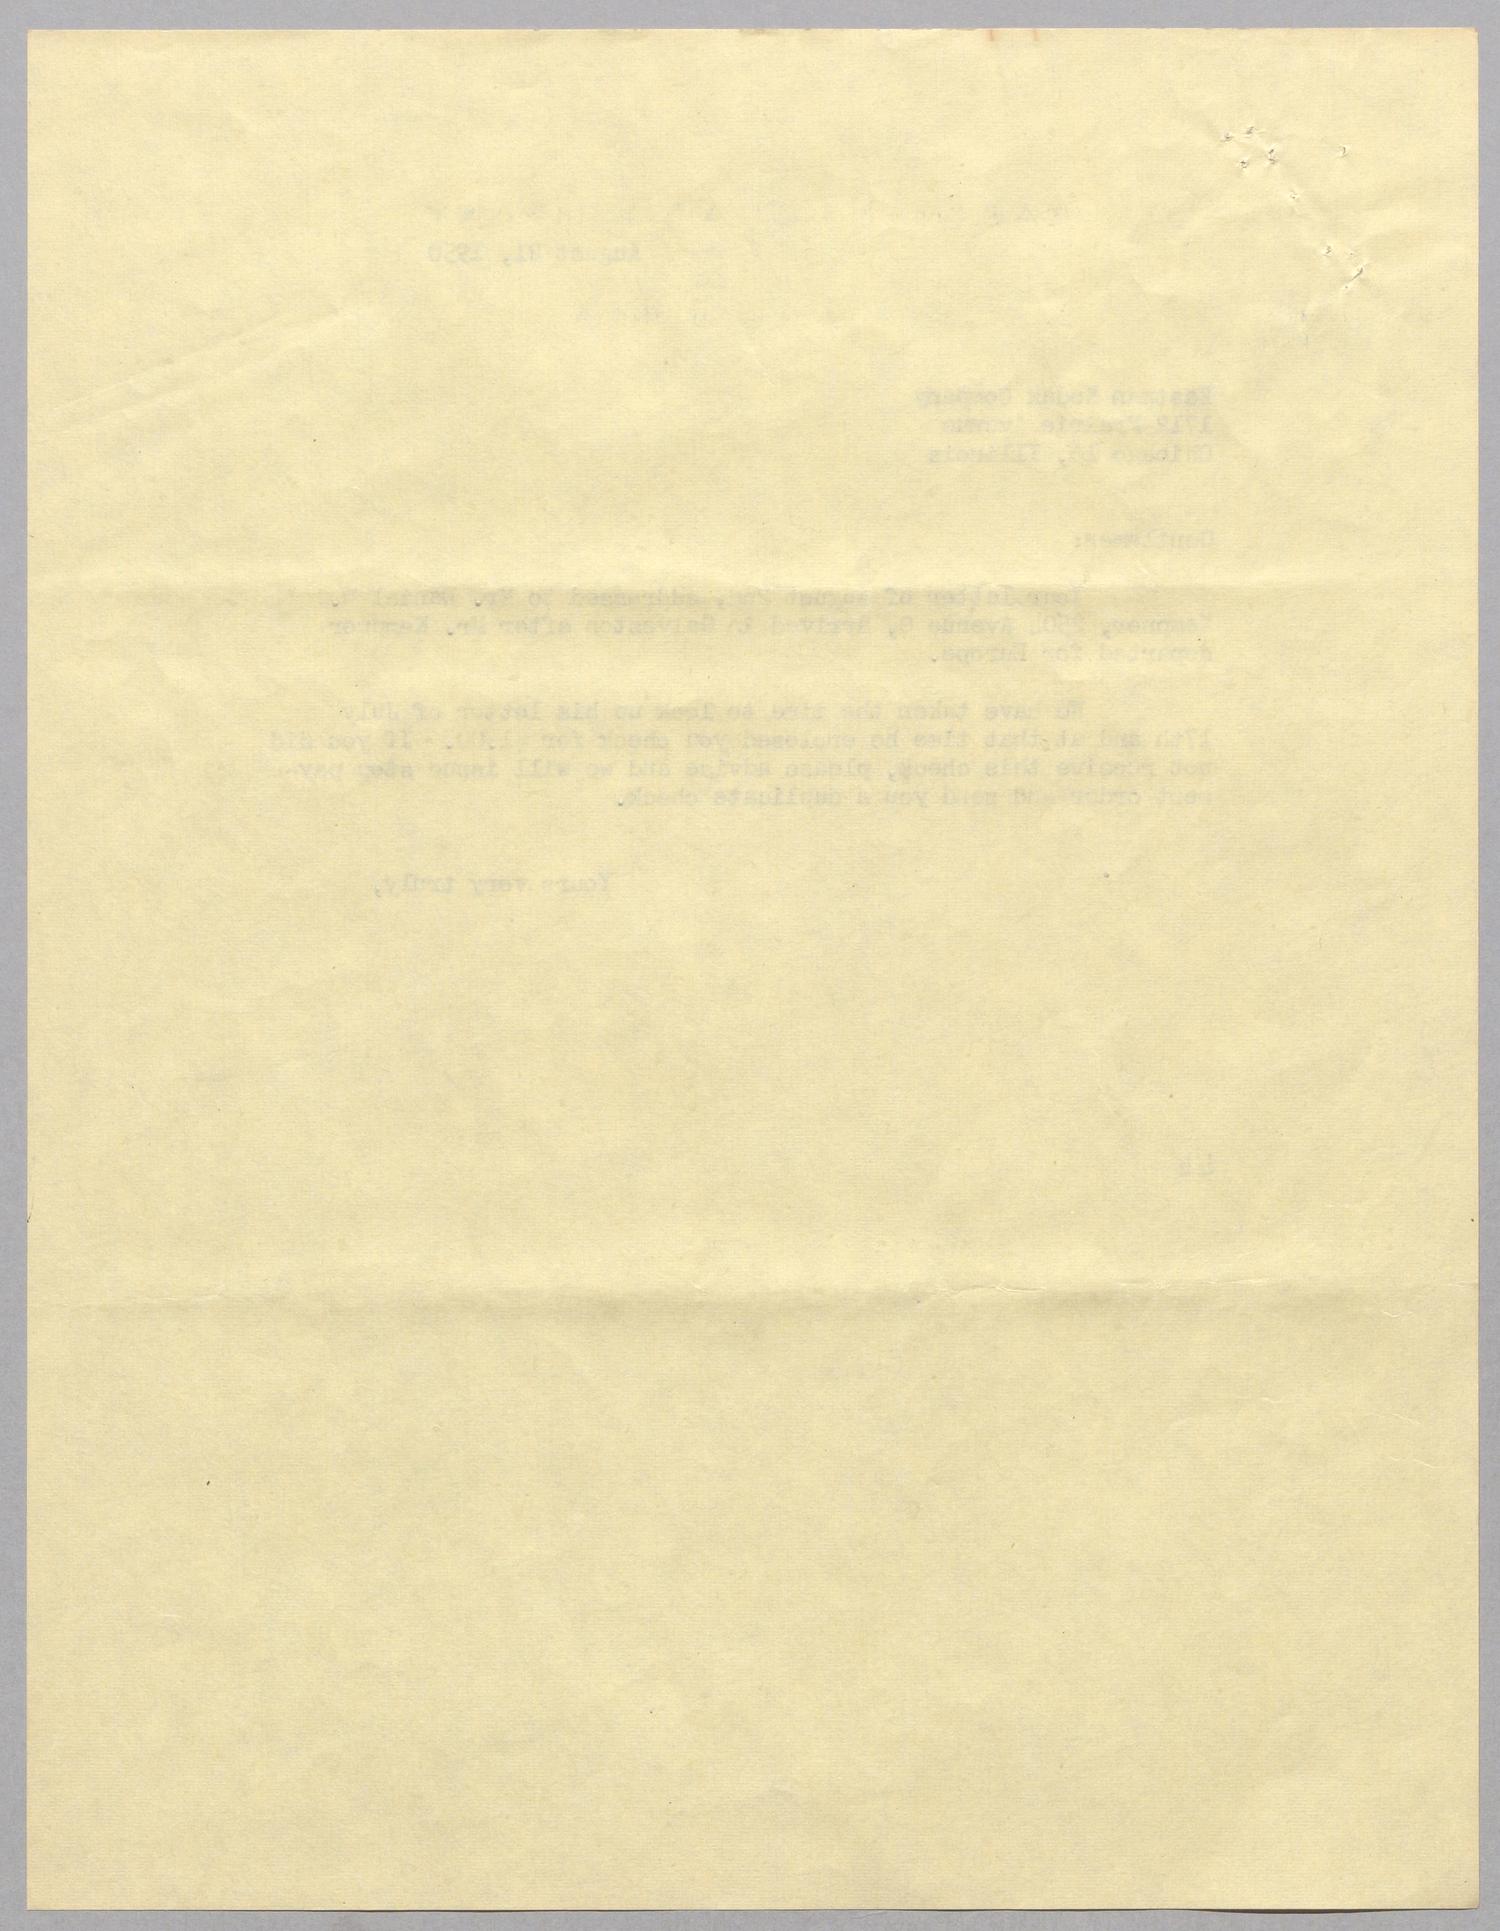 [Letter from A. H. Blackshear, Jr. to Eastman Kodak Company, August 21, 1950]
                                                
                                                    [Sequence #]: 2 of 2
                                                